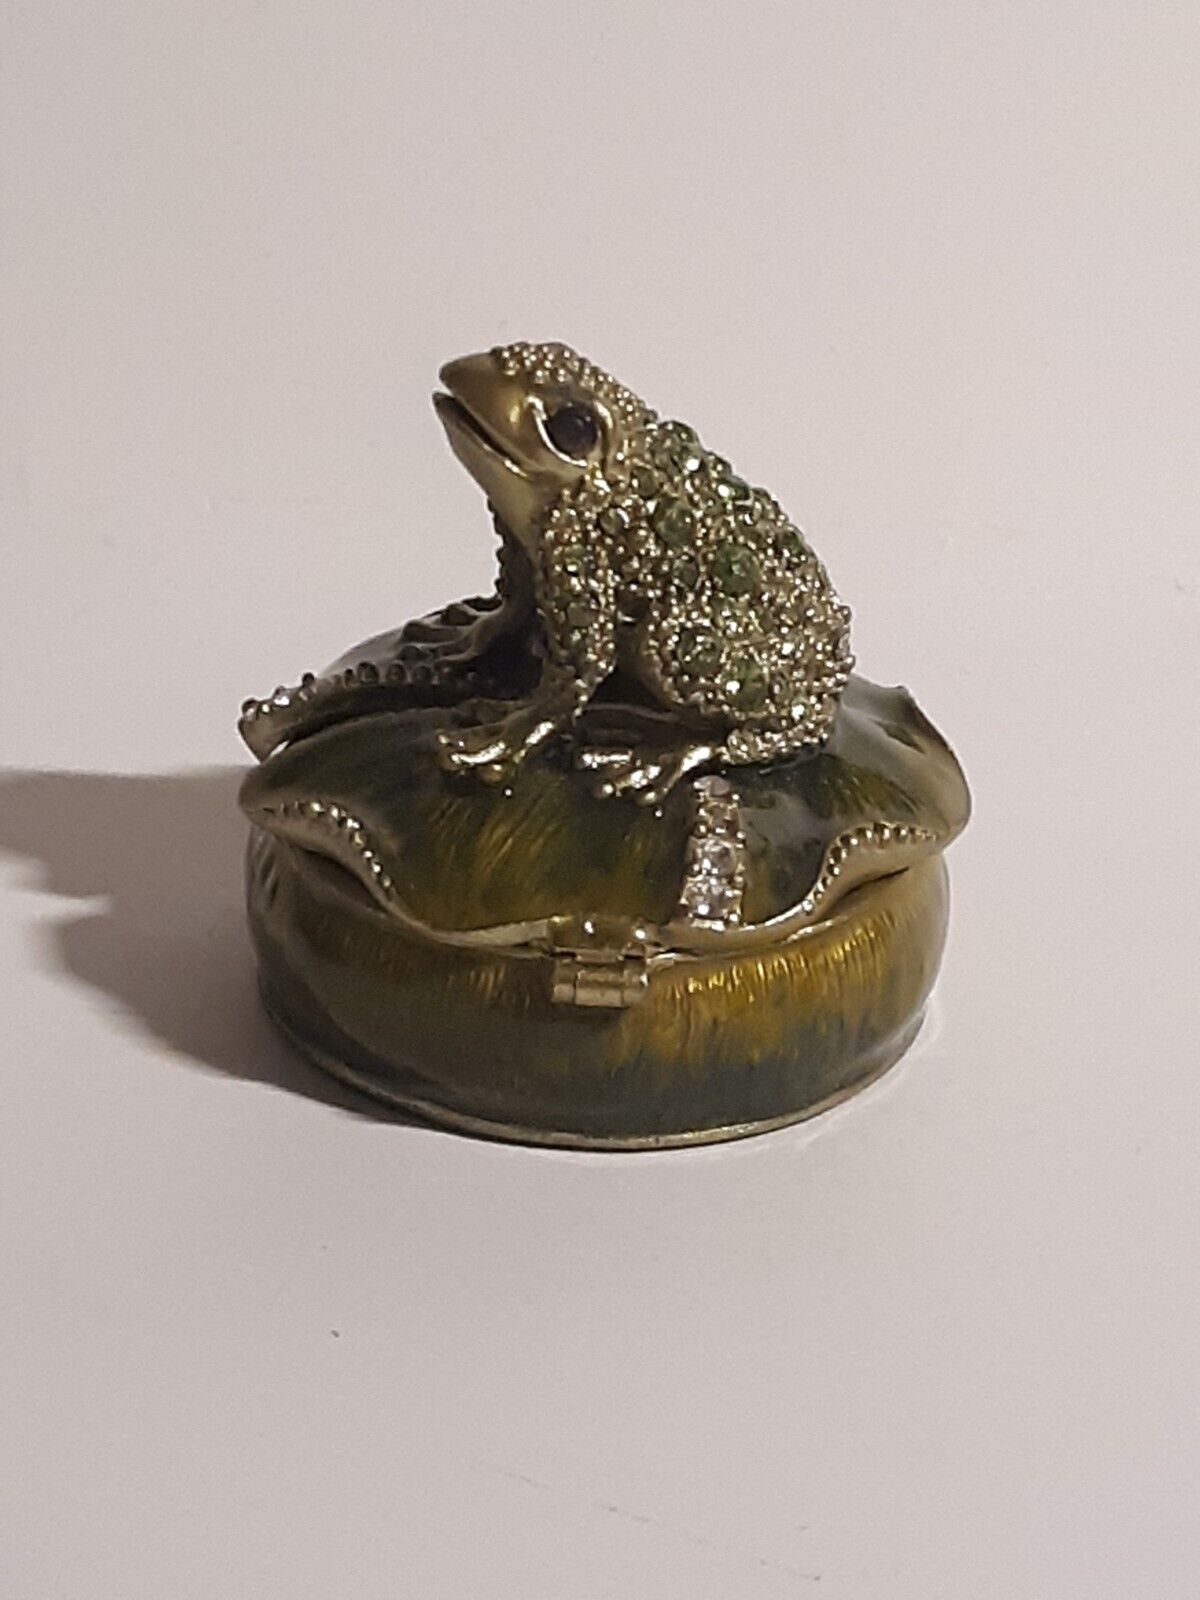 Enameled and Bejeweled Frog Pillbox